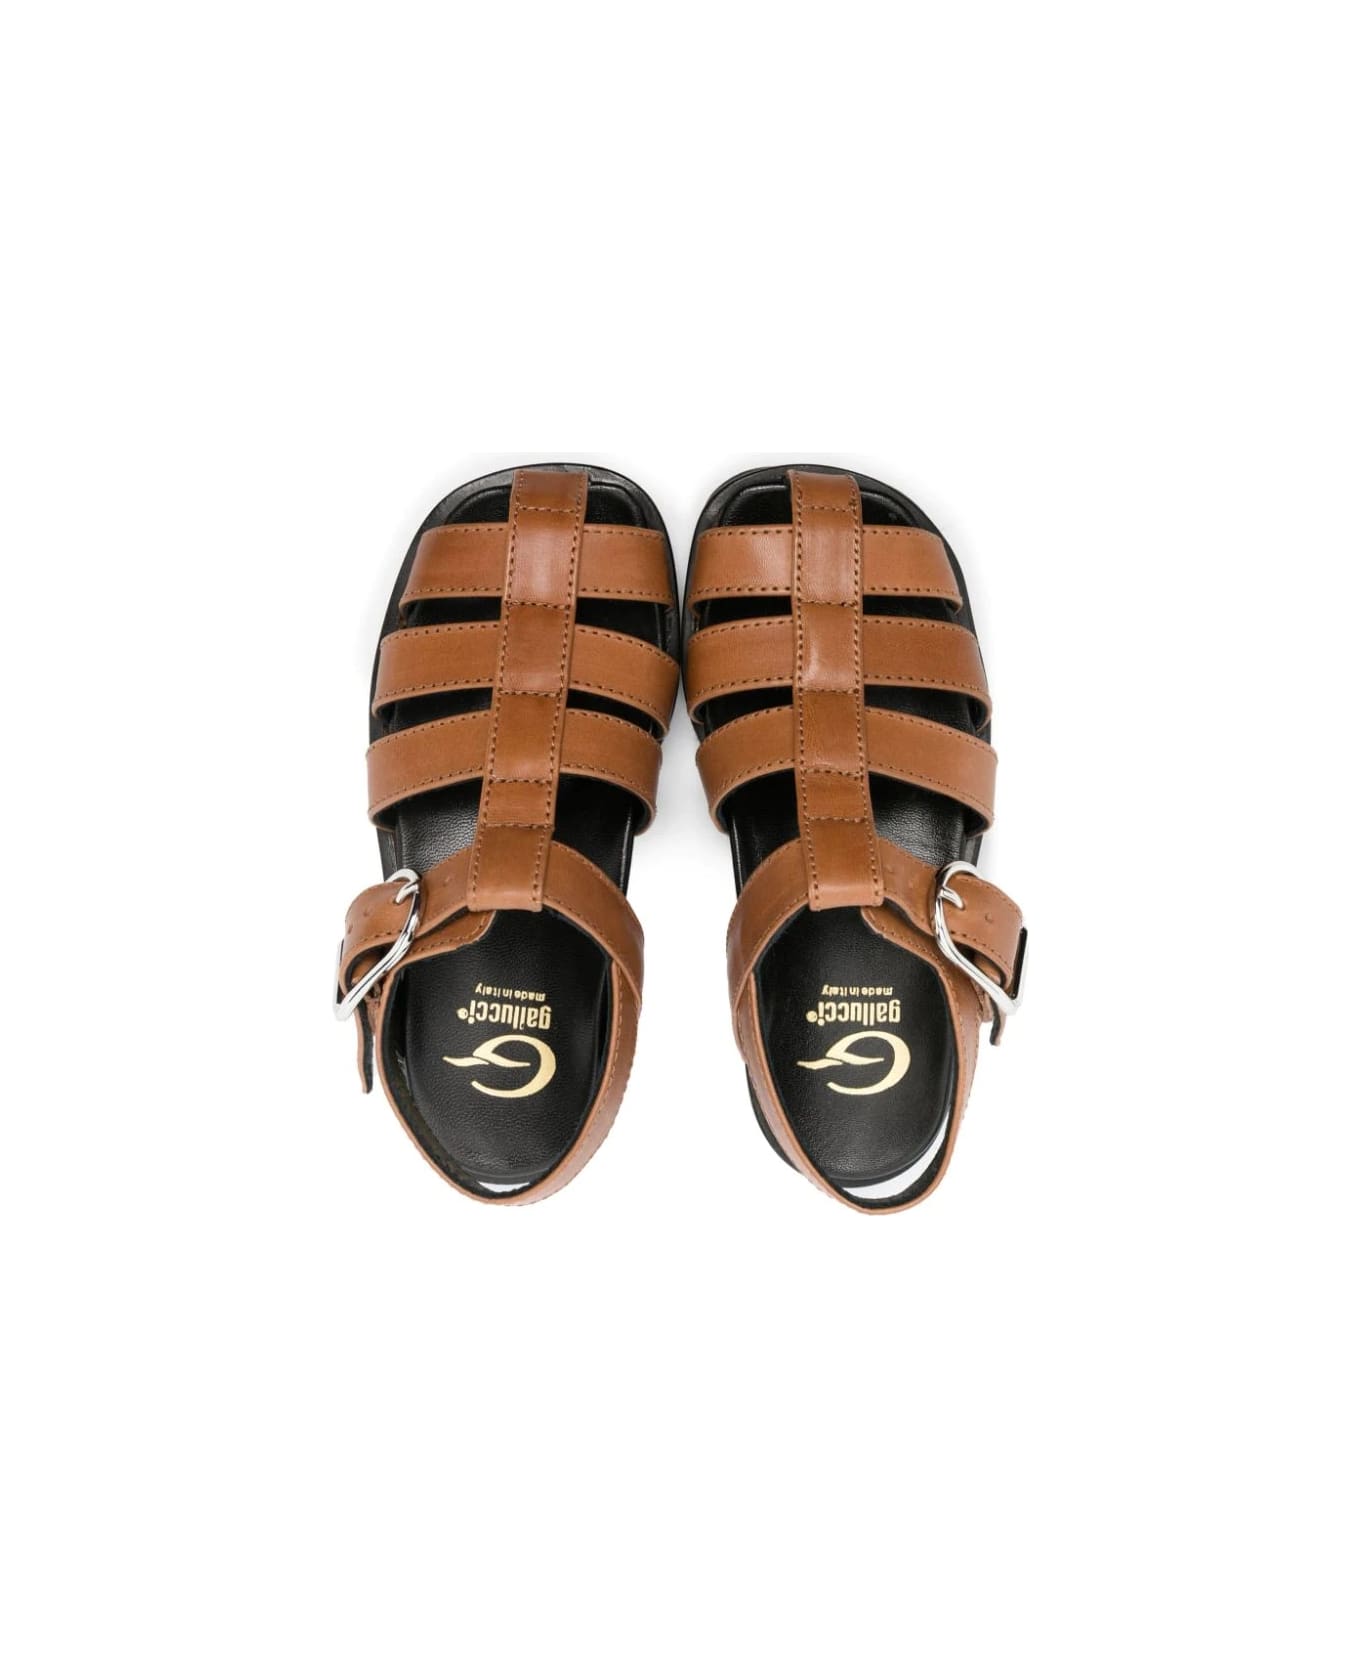 Gallucci Sandals With Buckle - Brown シューズ